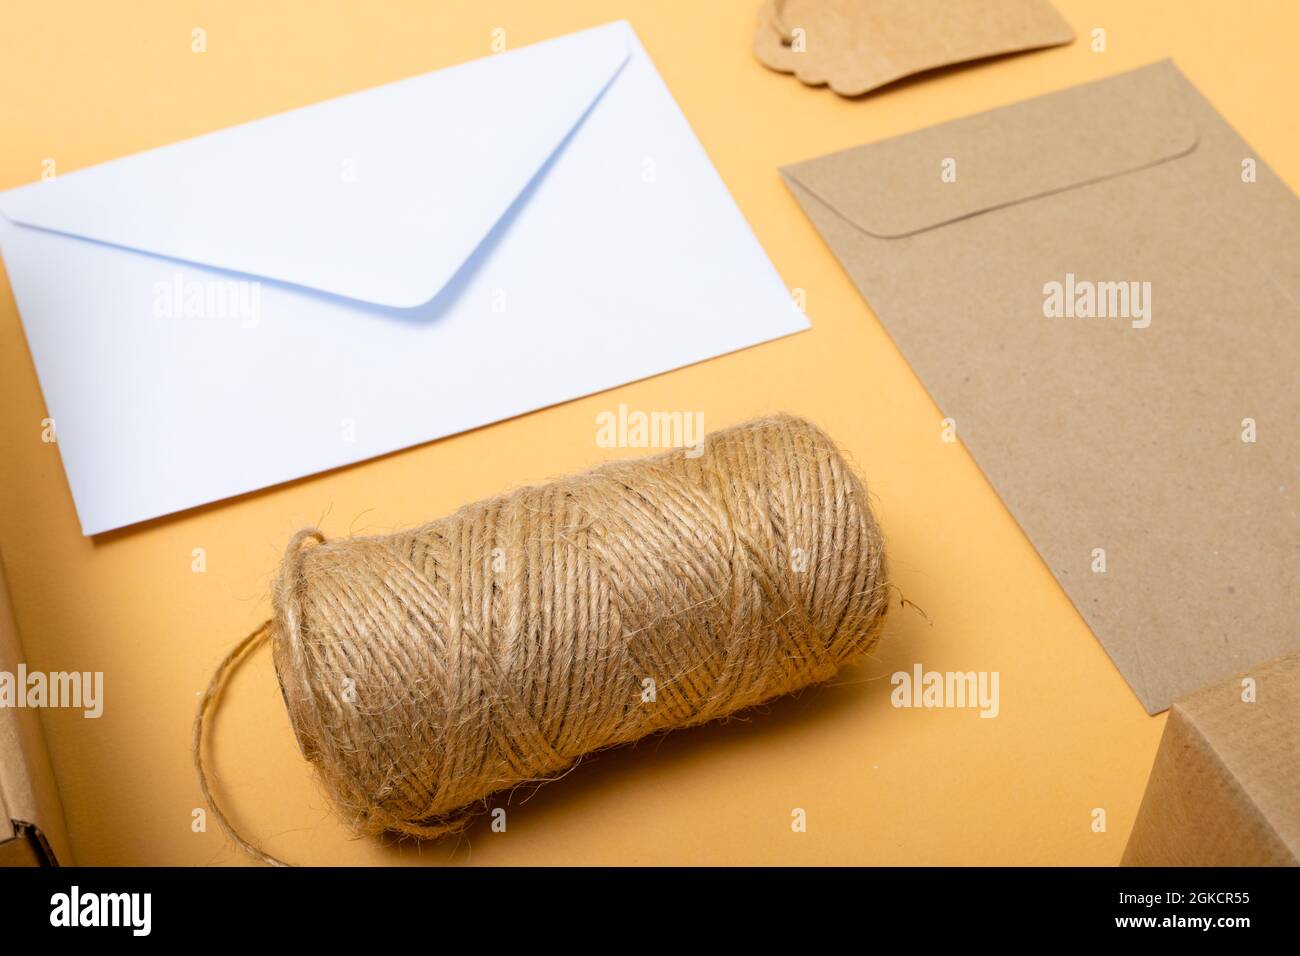 Composition of rope, envelopes and gift tag on yellow background Stock Photo